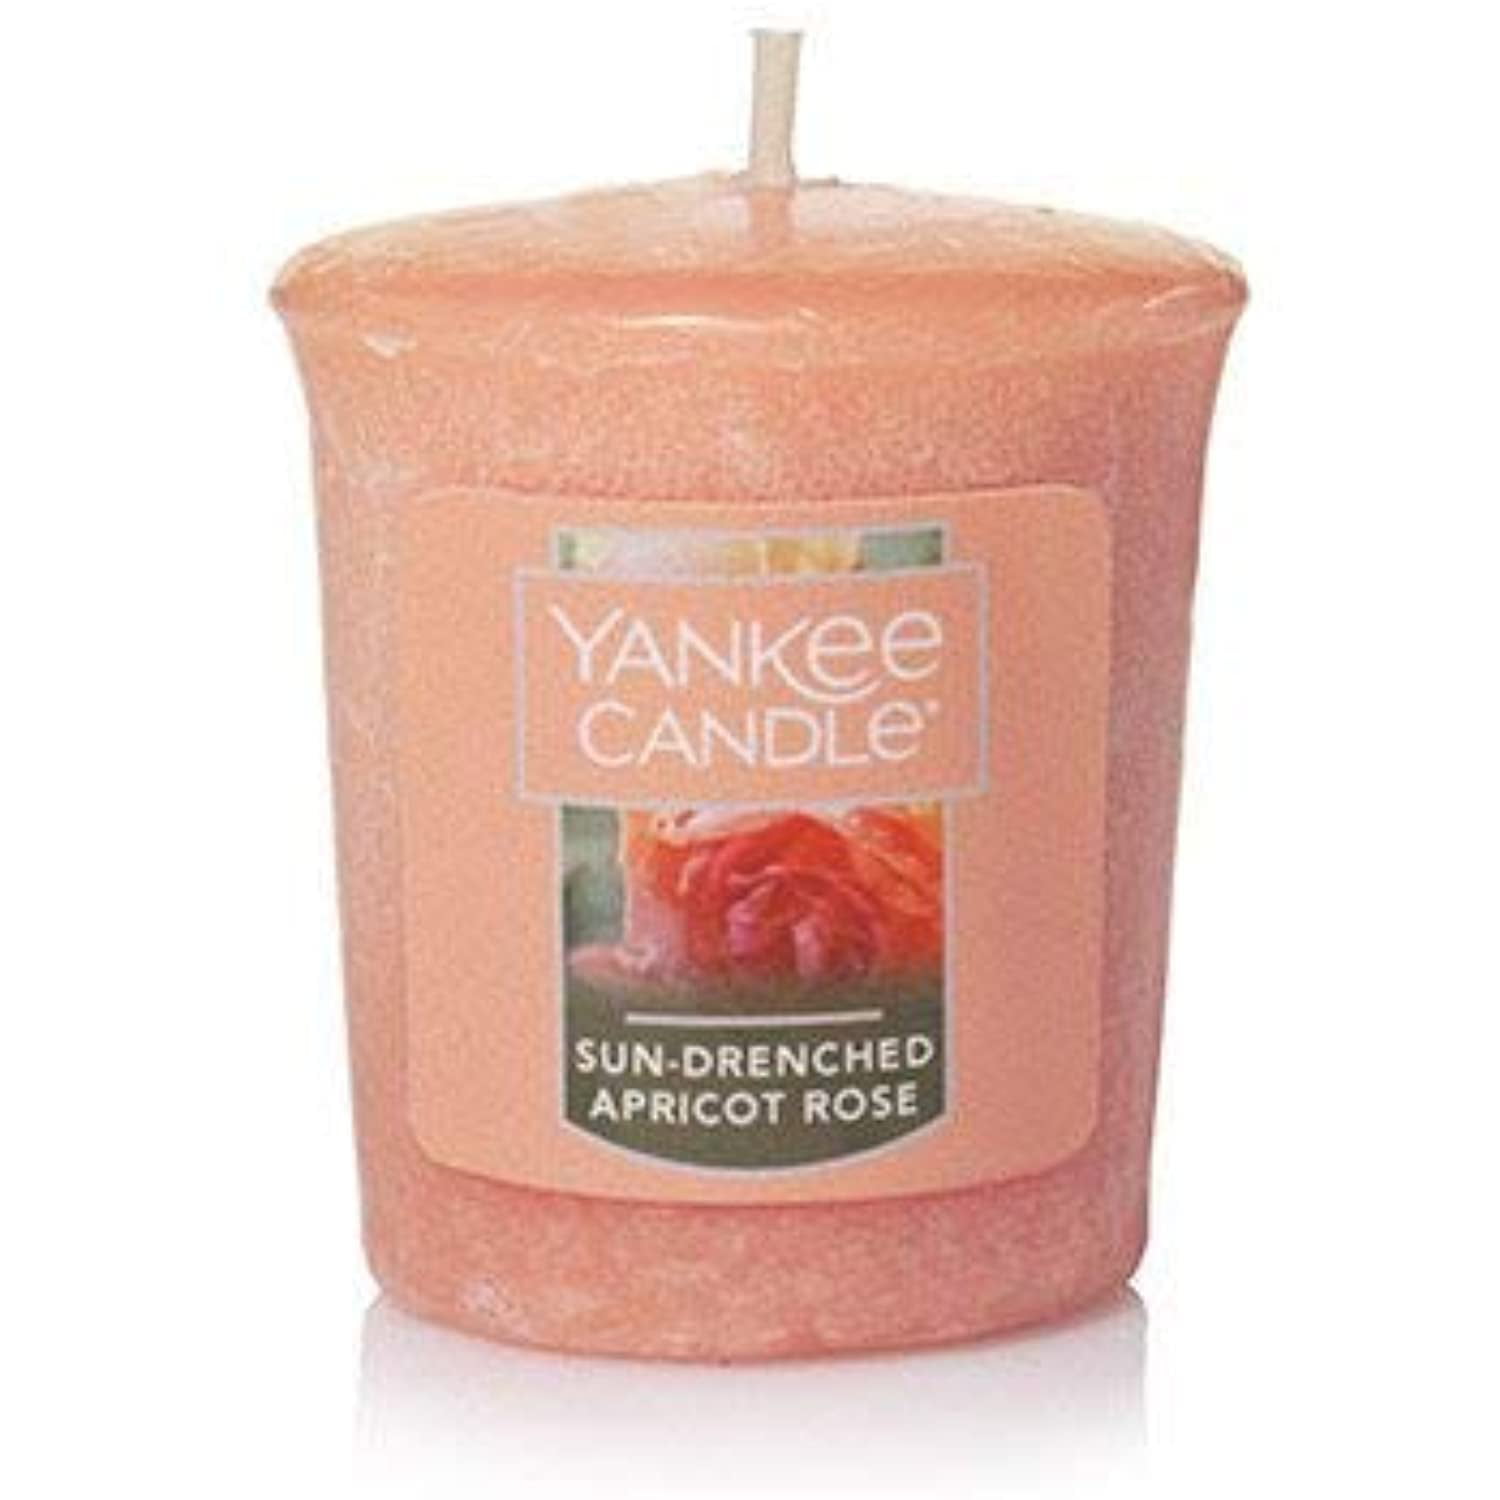 Yankee Candle, 22 oz Jars "Sun-Drenched Apricot" 2 